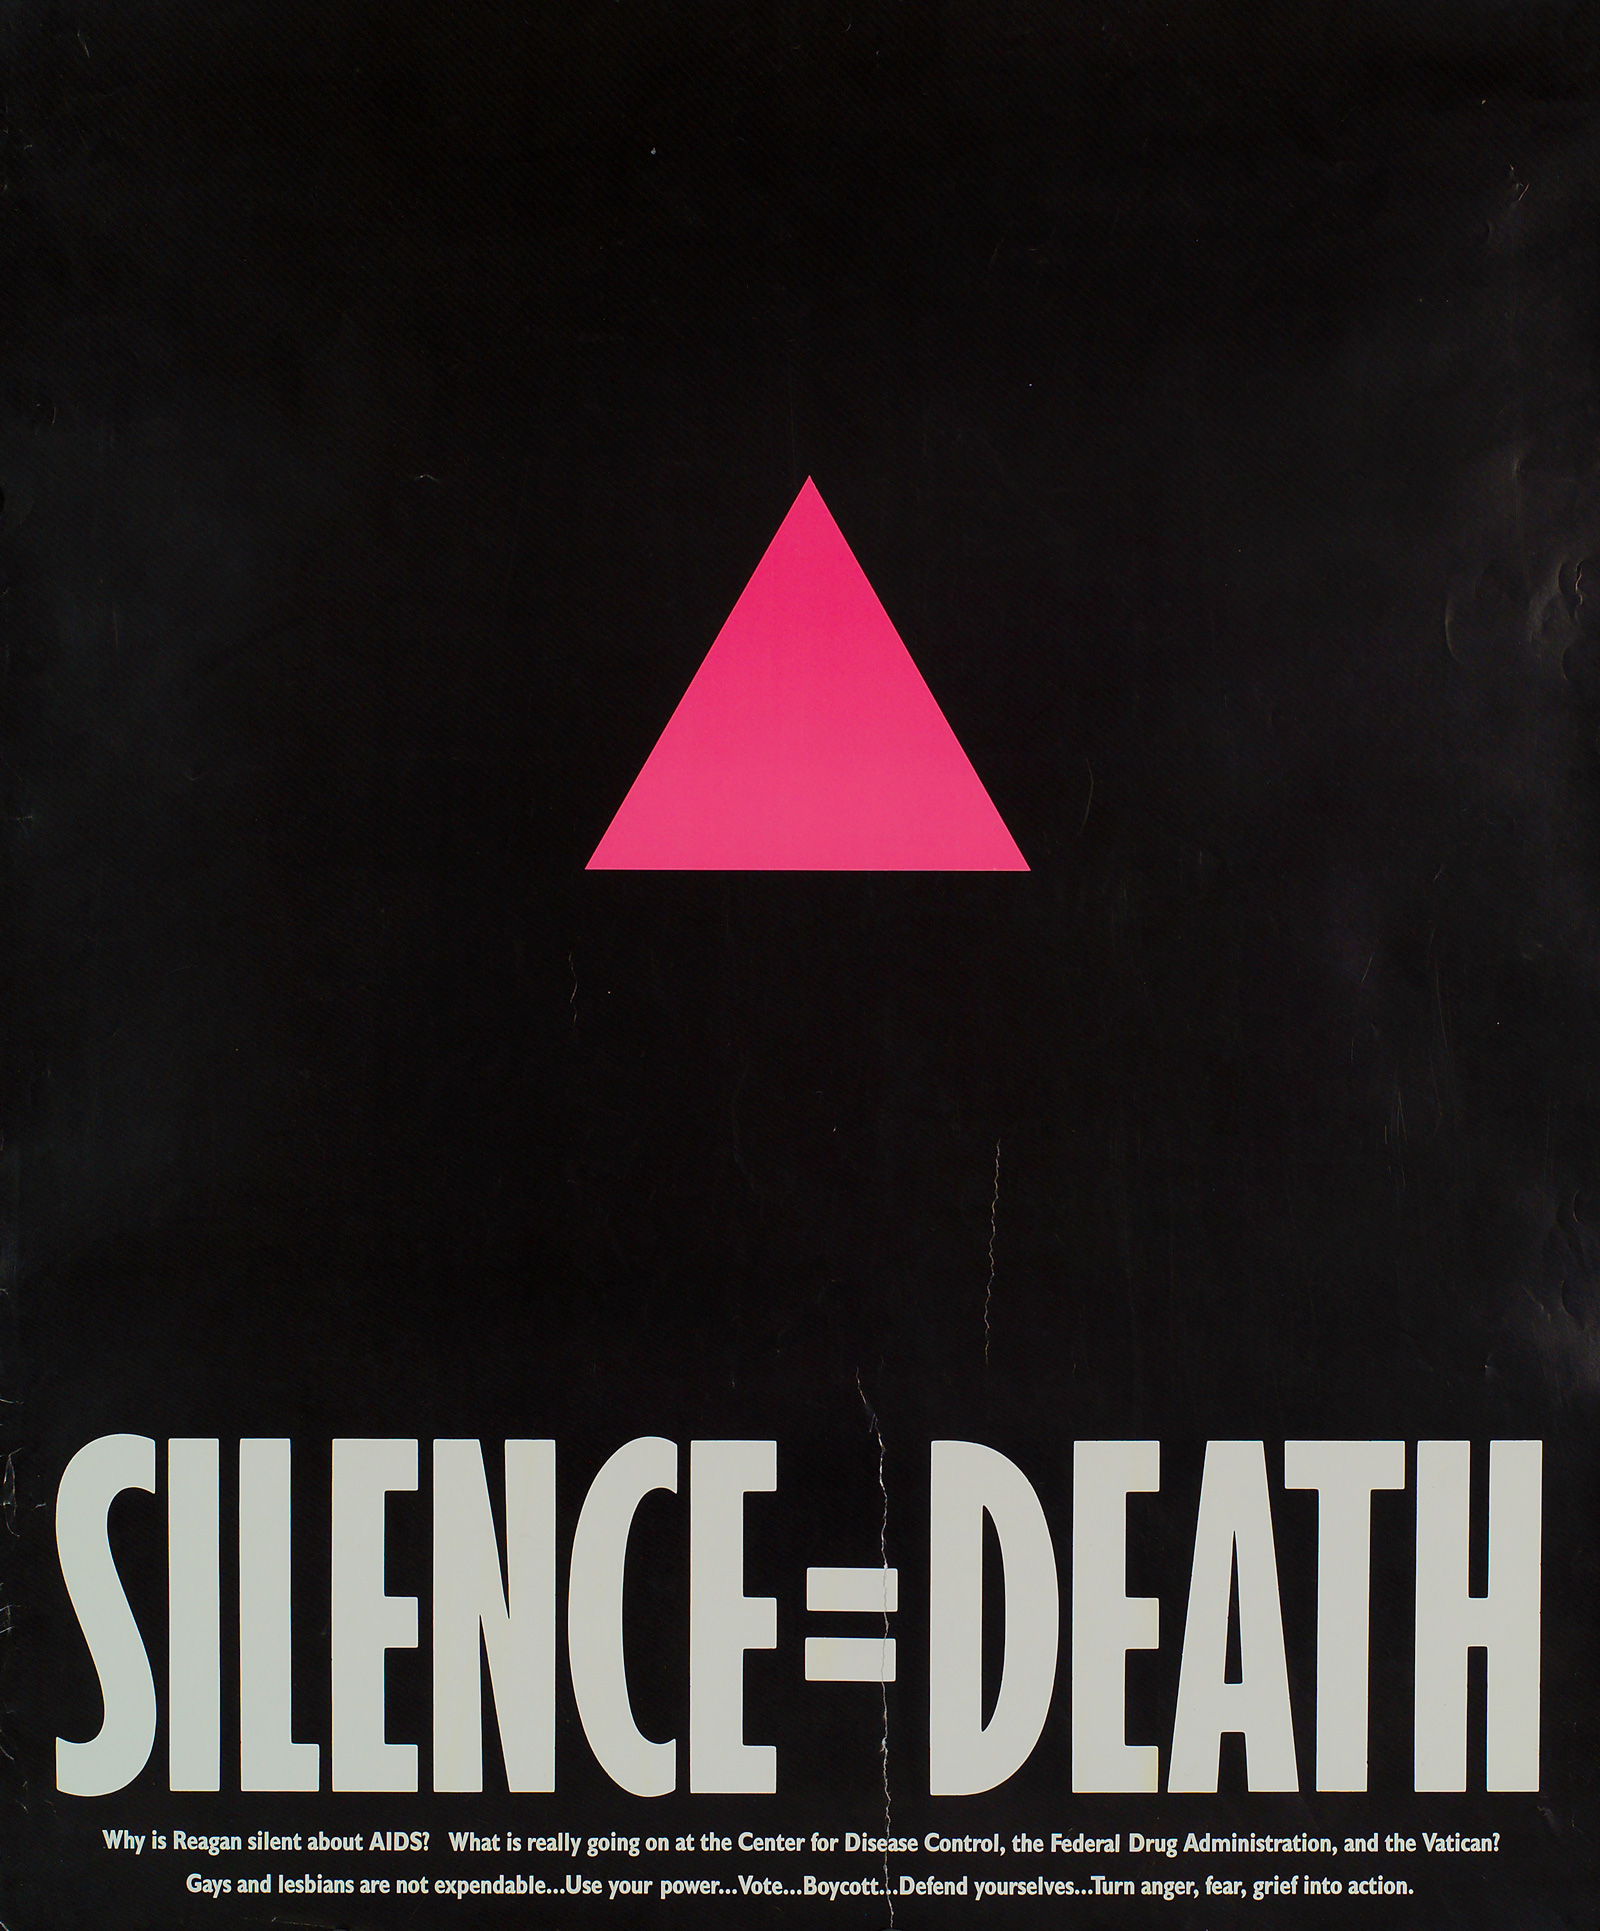 A poster with a pink triangle against a black background and the title “Silence = Death” in white at the bottom